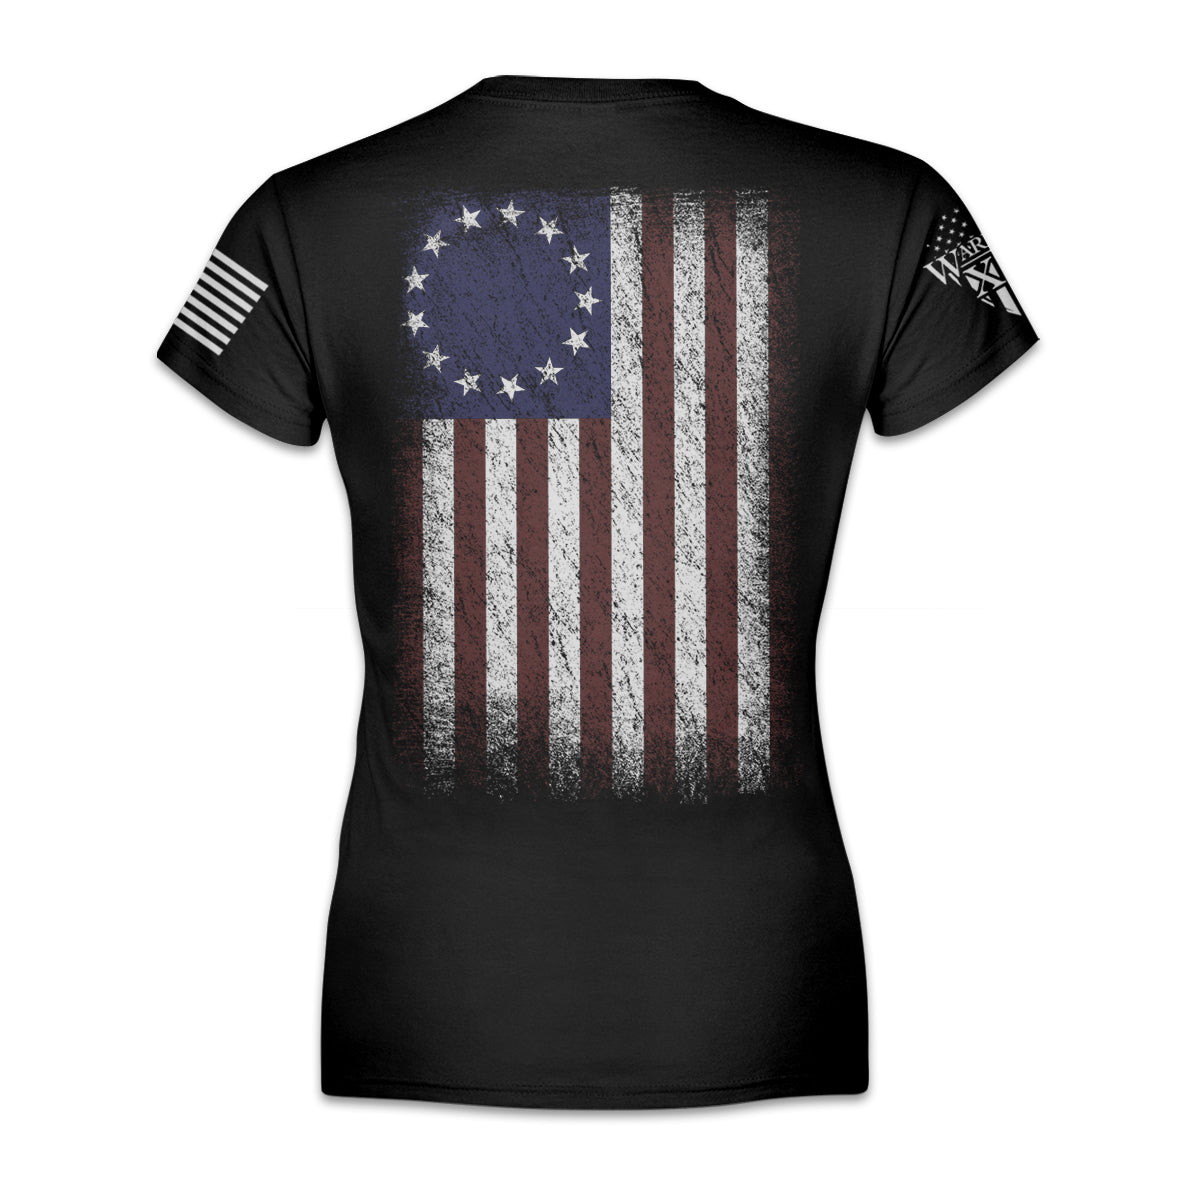 Betsy Ross Flag - Women's Relaxed Fit